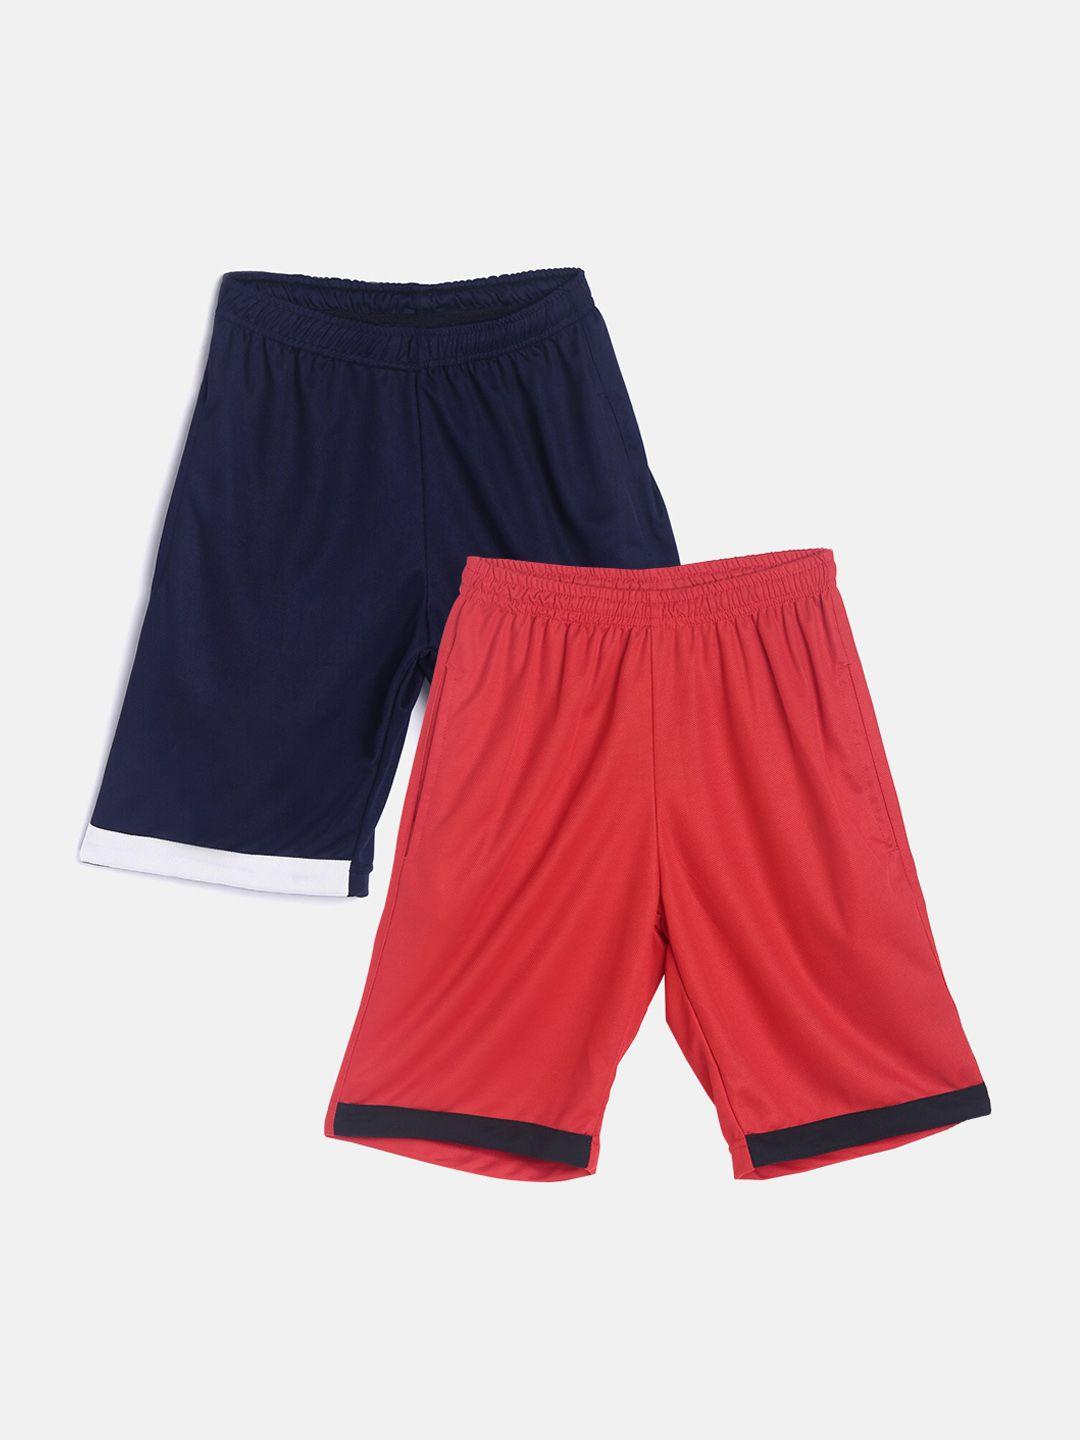 tiny hug boys pack of 2 navy blue and red high-rise outdoor shorts